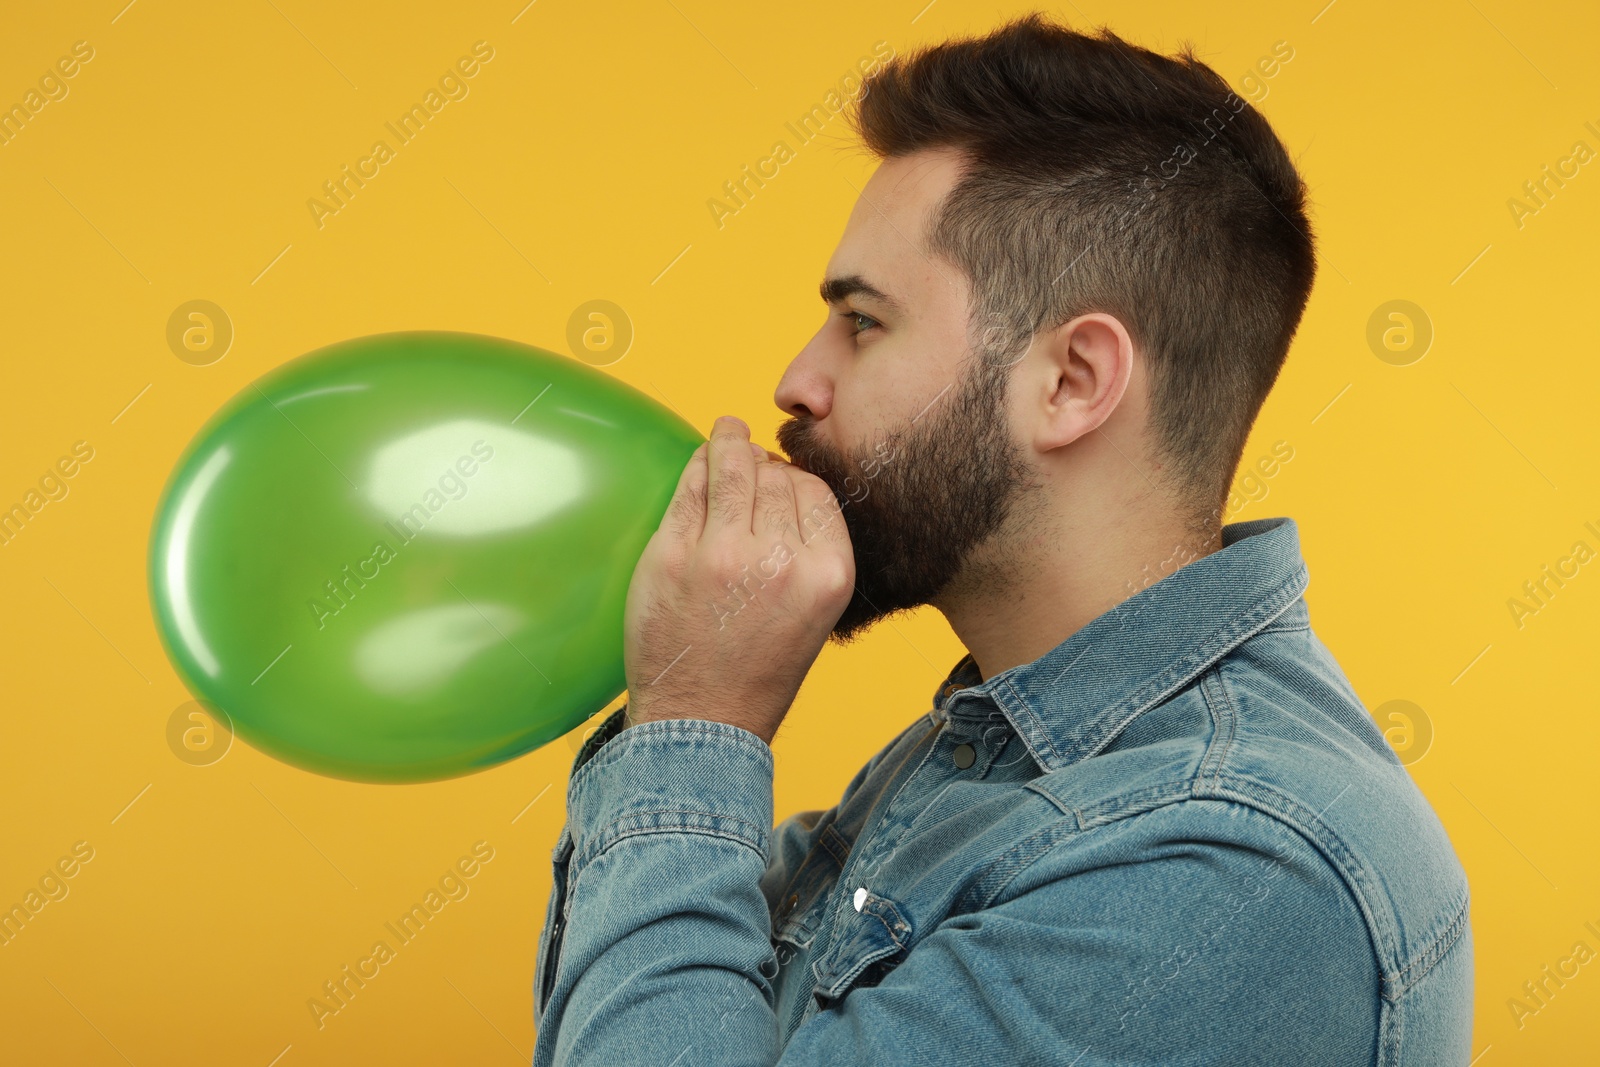 Photo of Man inflating bright balloon on yellow background